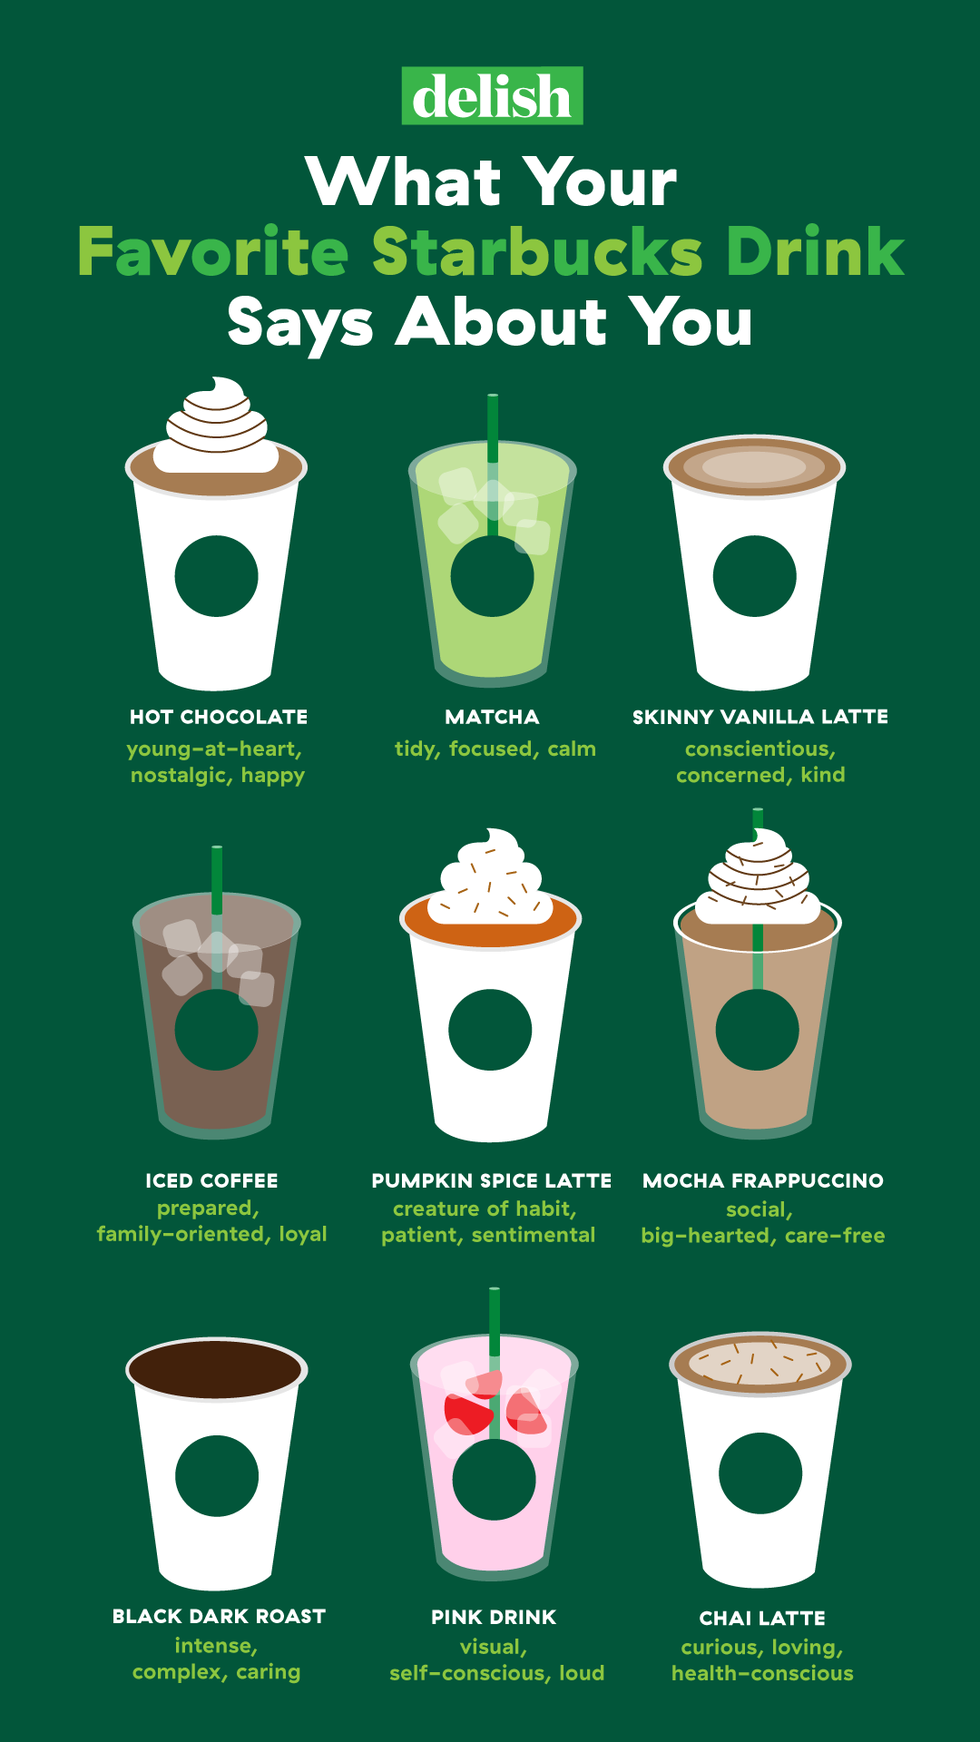 What Your Favorite Starbucks Drink Says About You